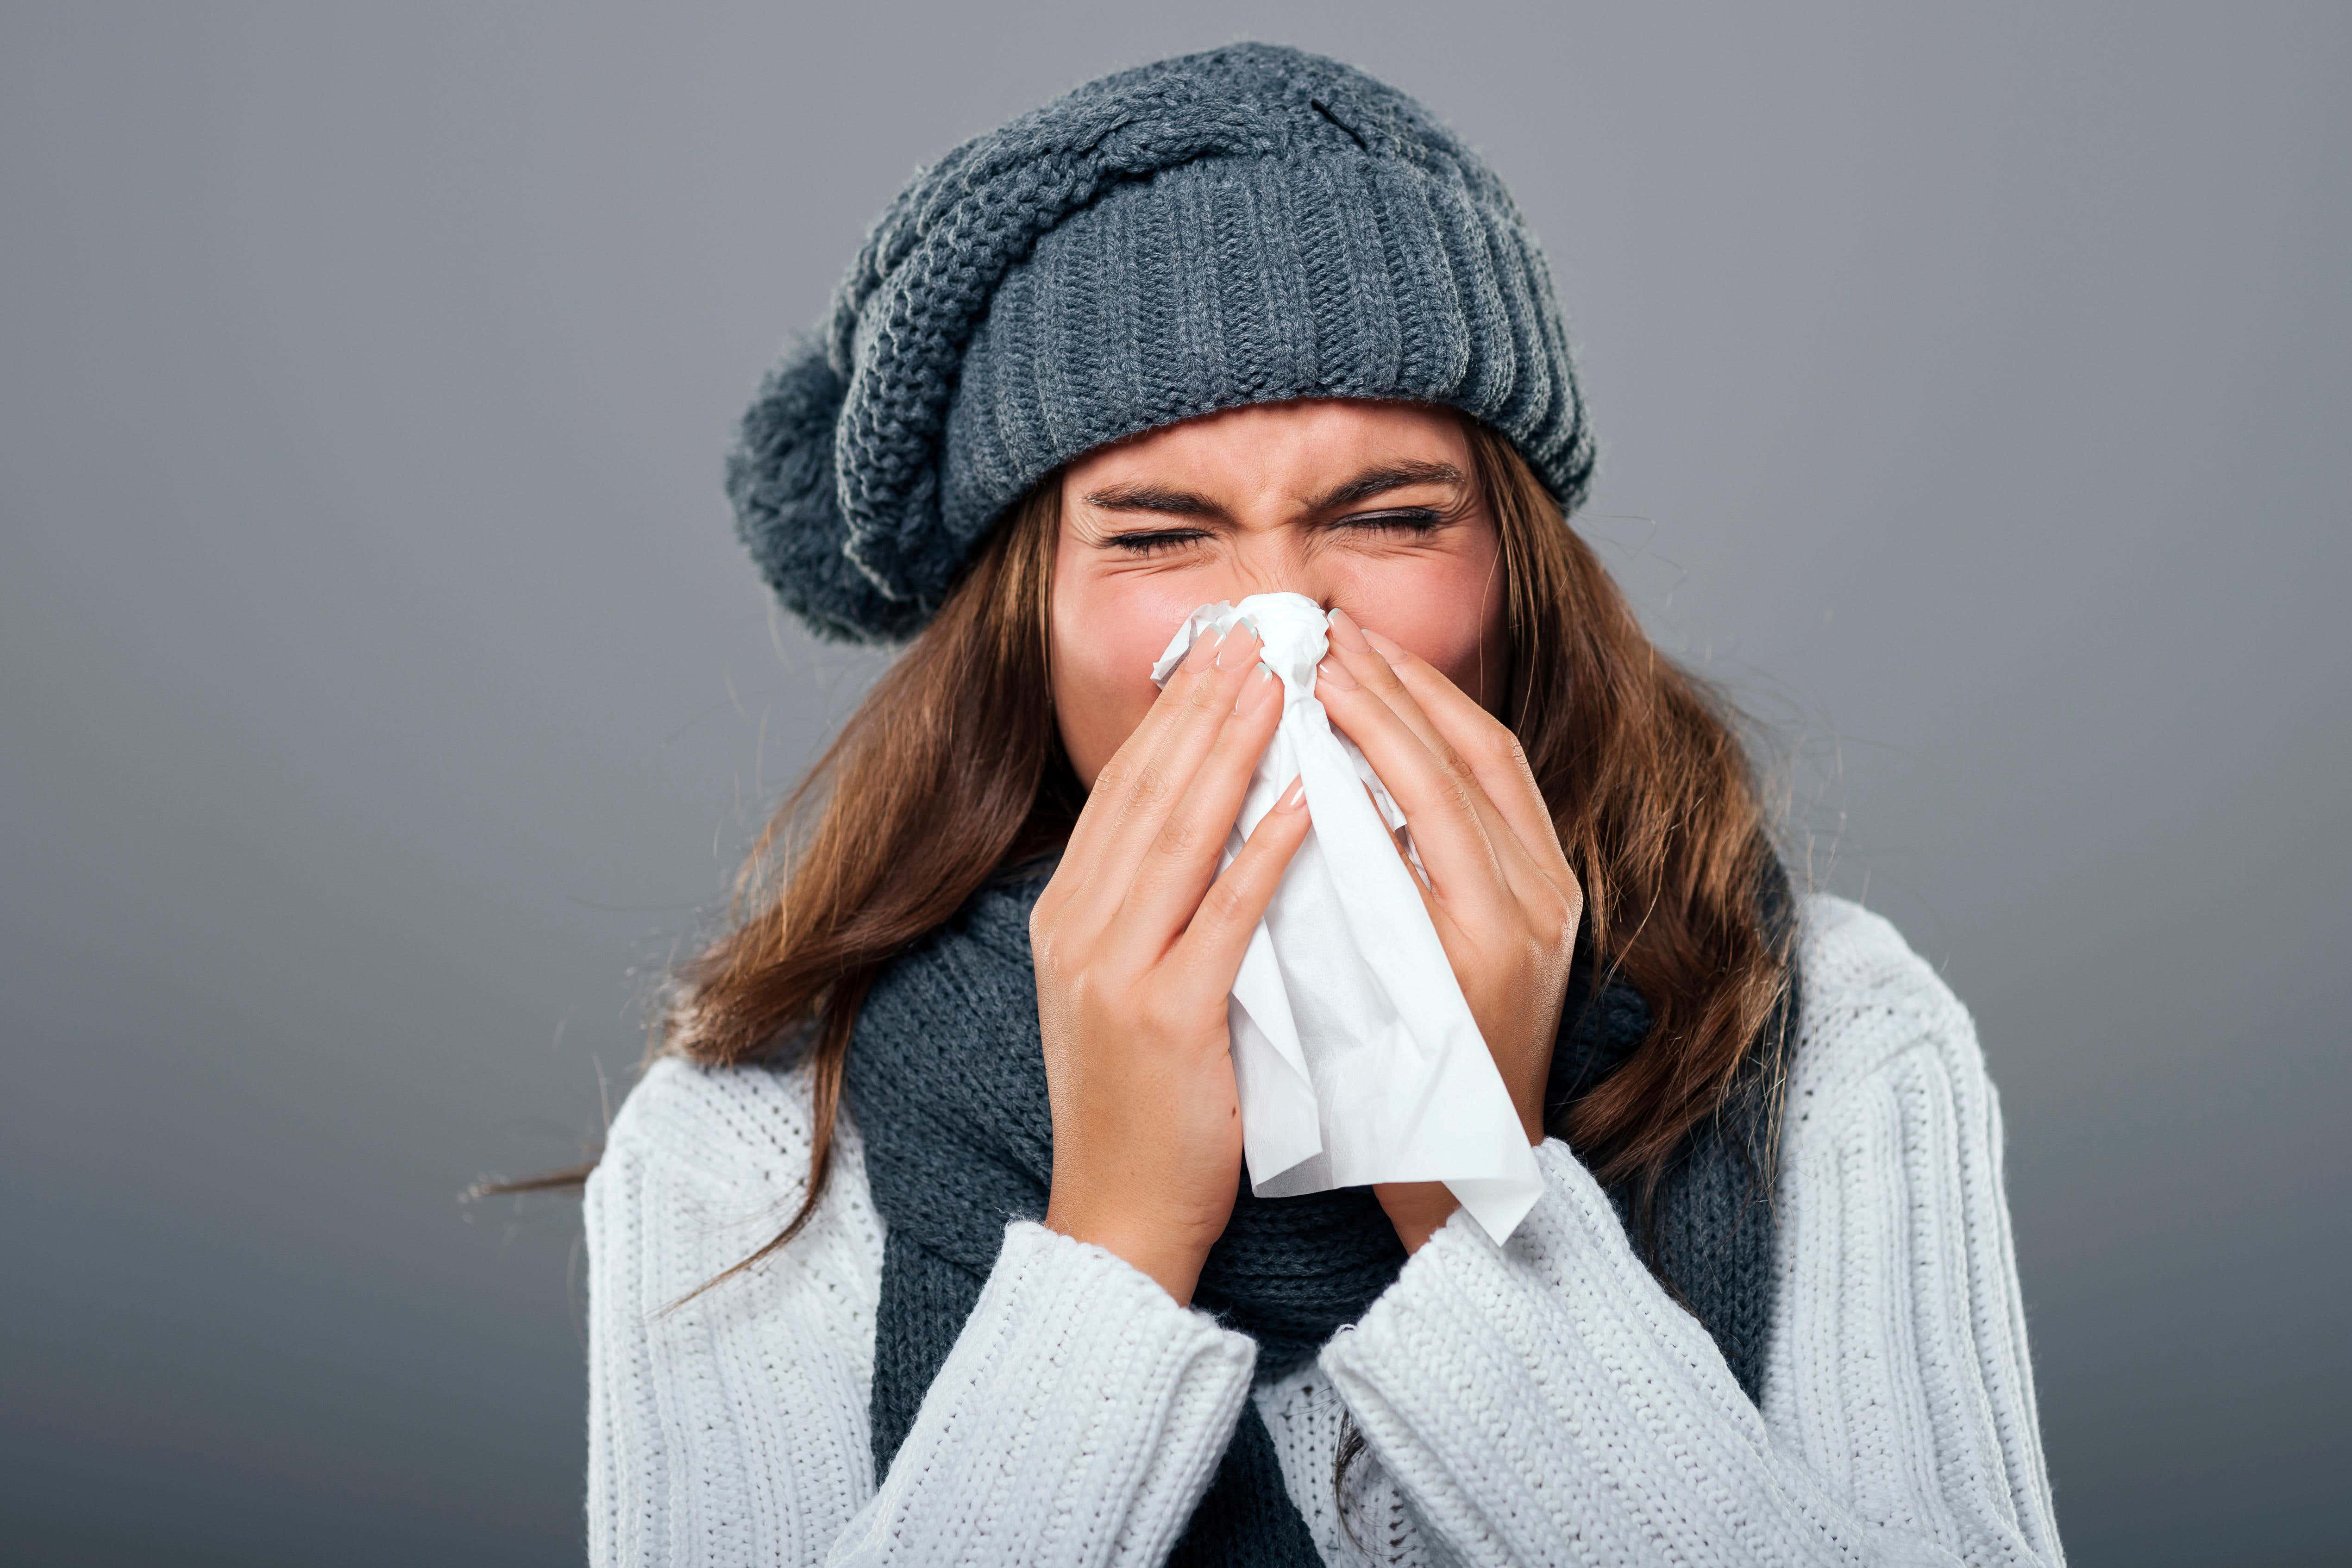 hilary jones, fed up with catching colds? here’s what your doctor really wants you to know